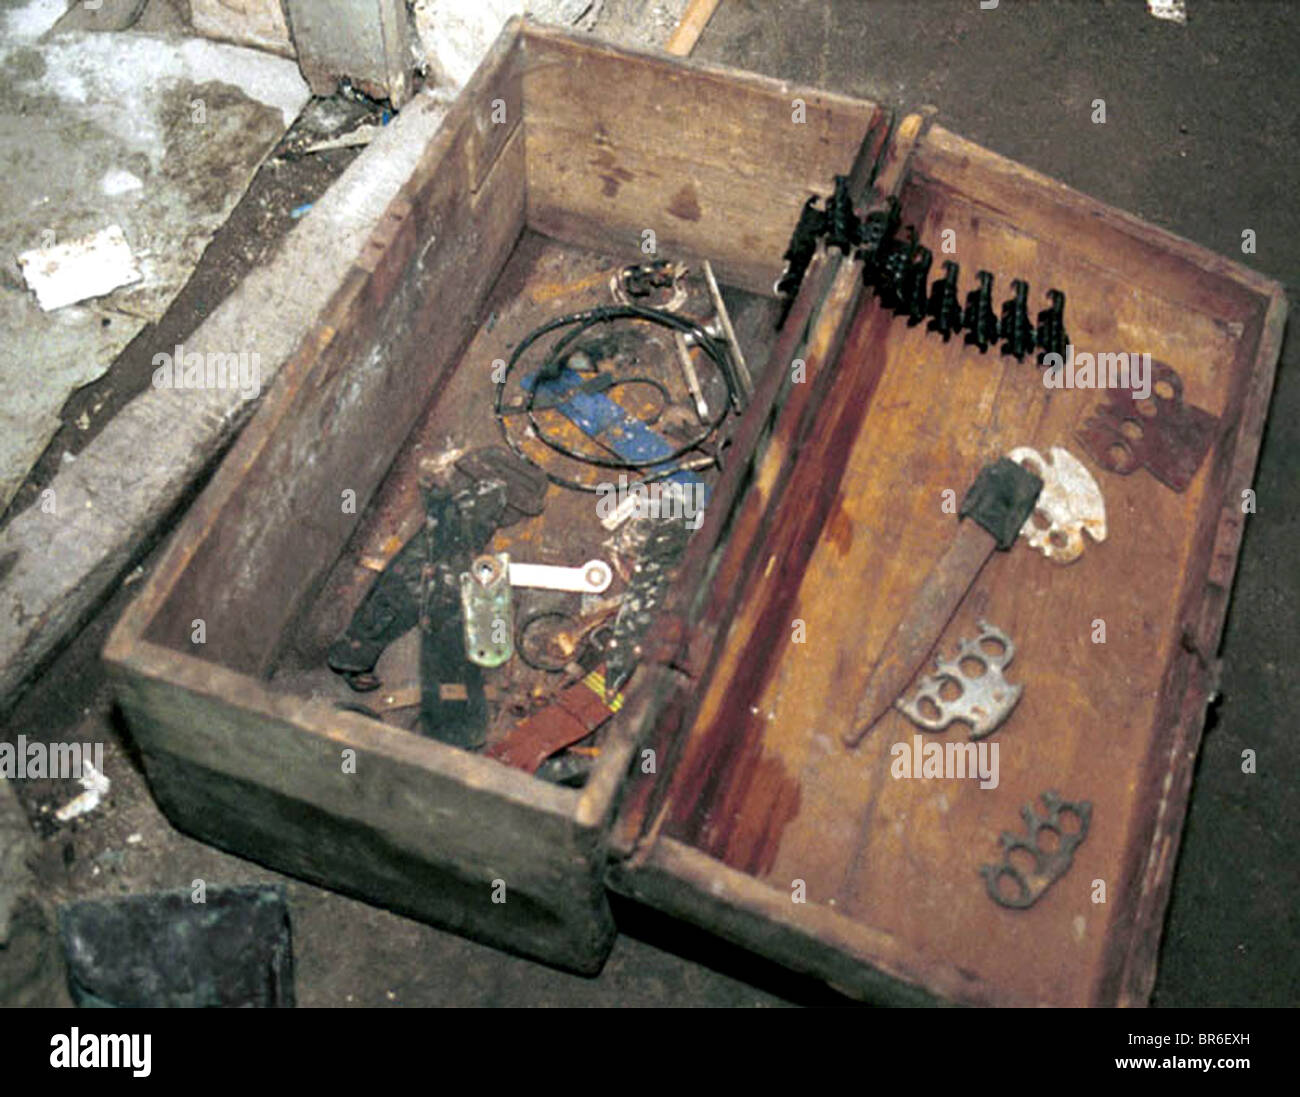 A box of weapons at police station torture chamber used by Serbian police in Pristina, Kosovo. Stock Photo